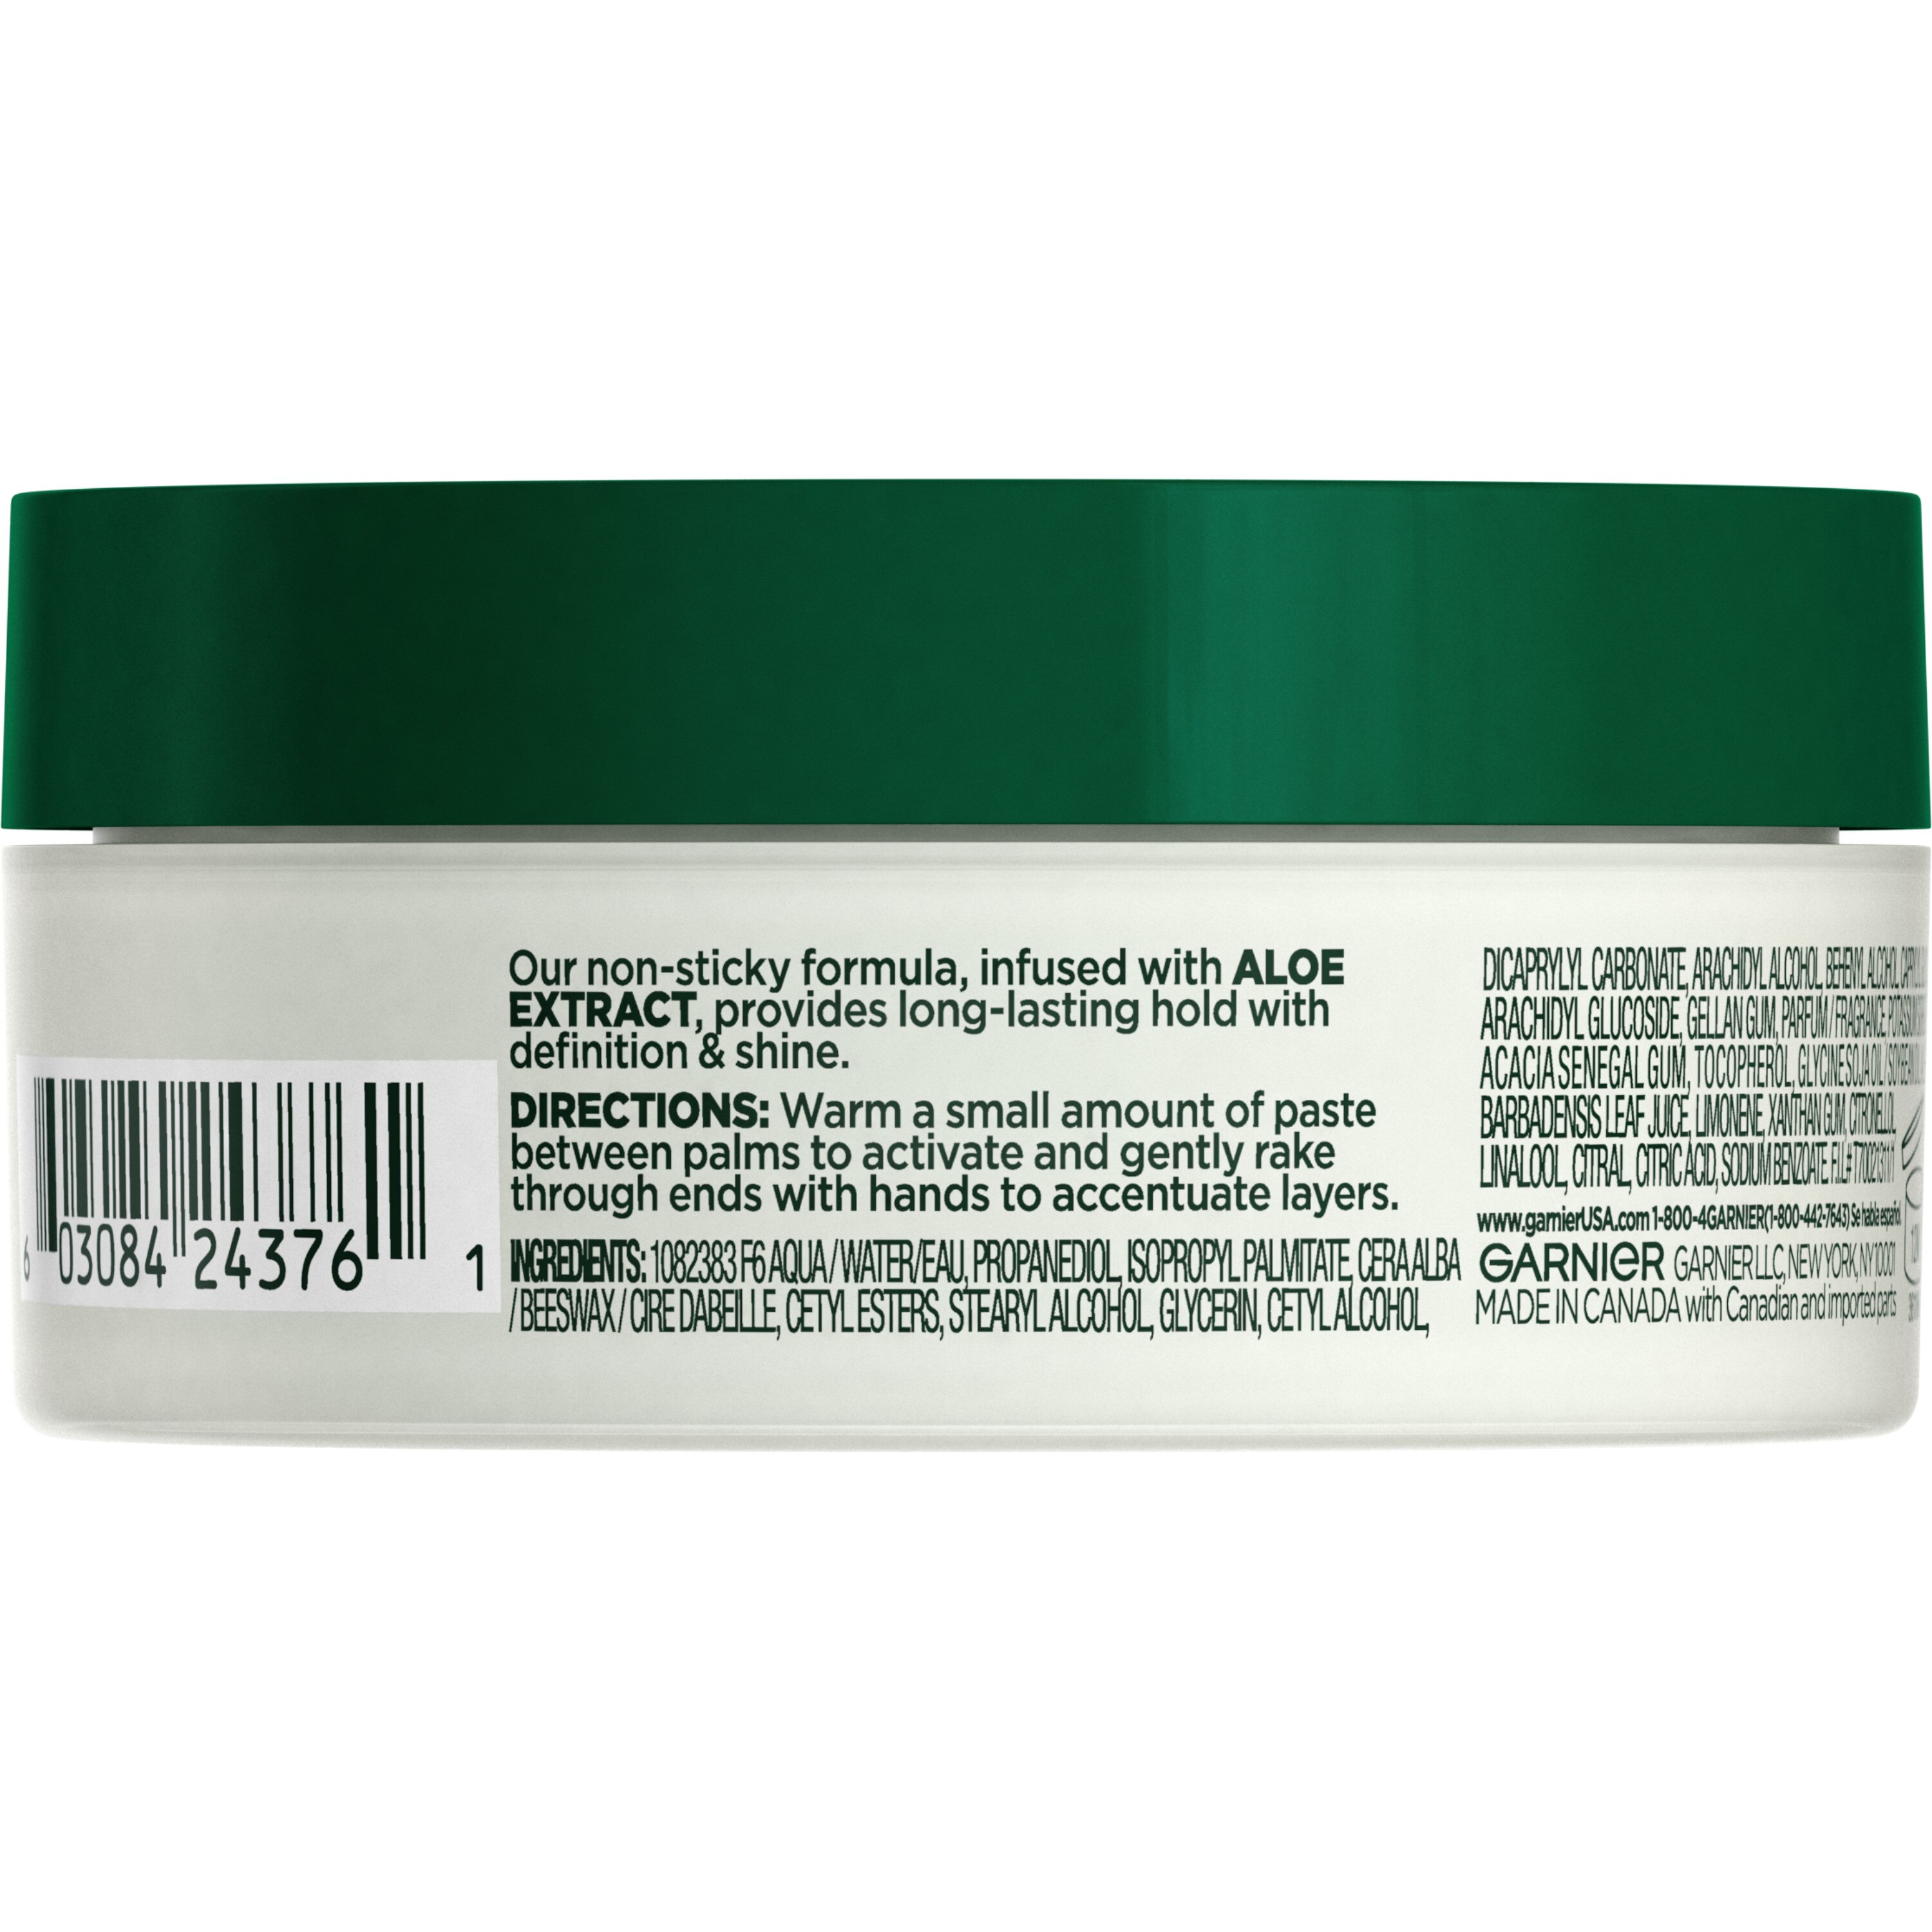 Garnier Fructis Pure Clean Paste, OZ | Pick Up In Store TODAY at CVS